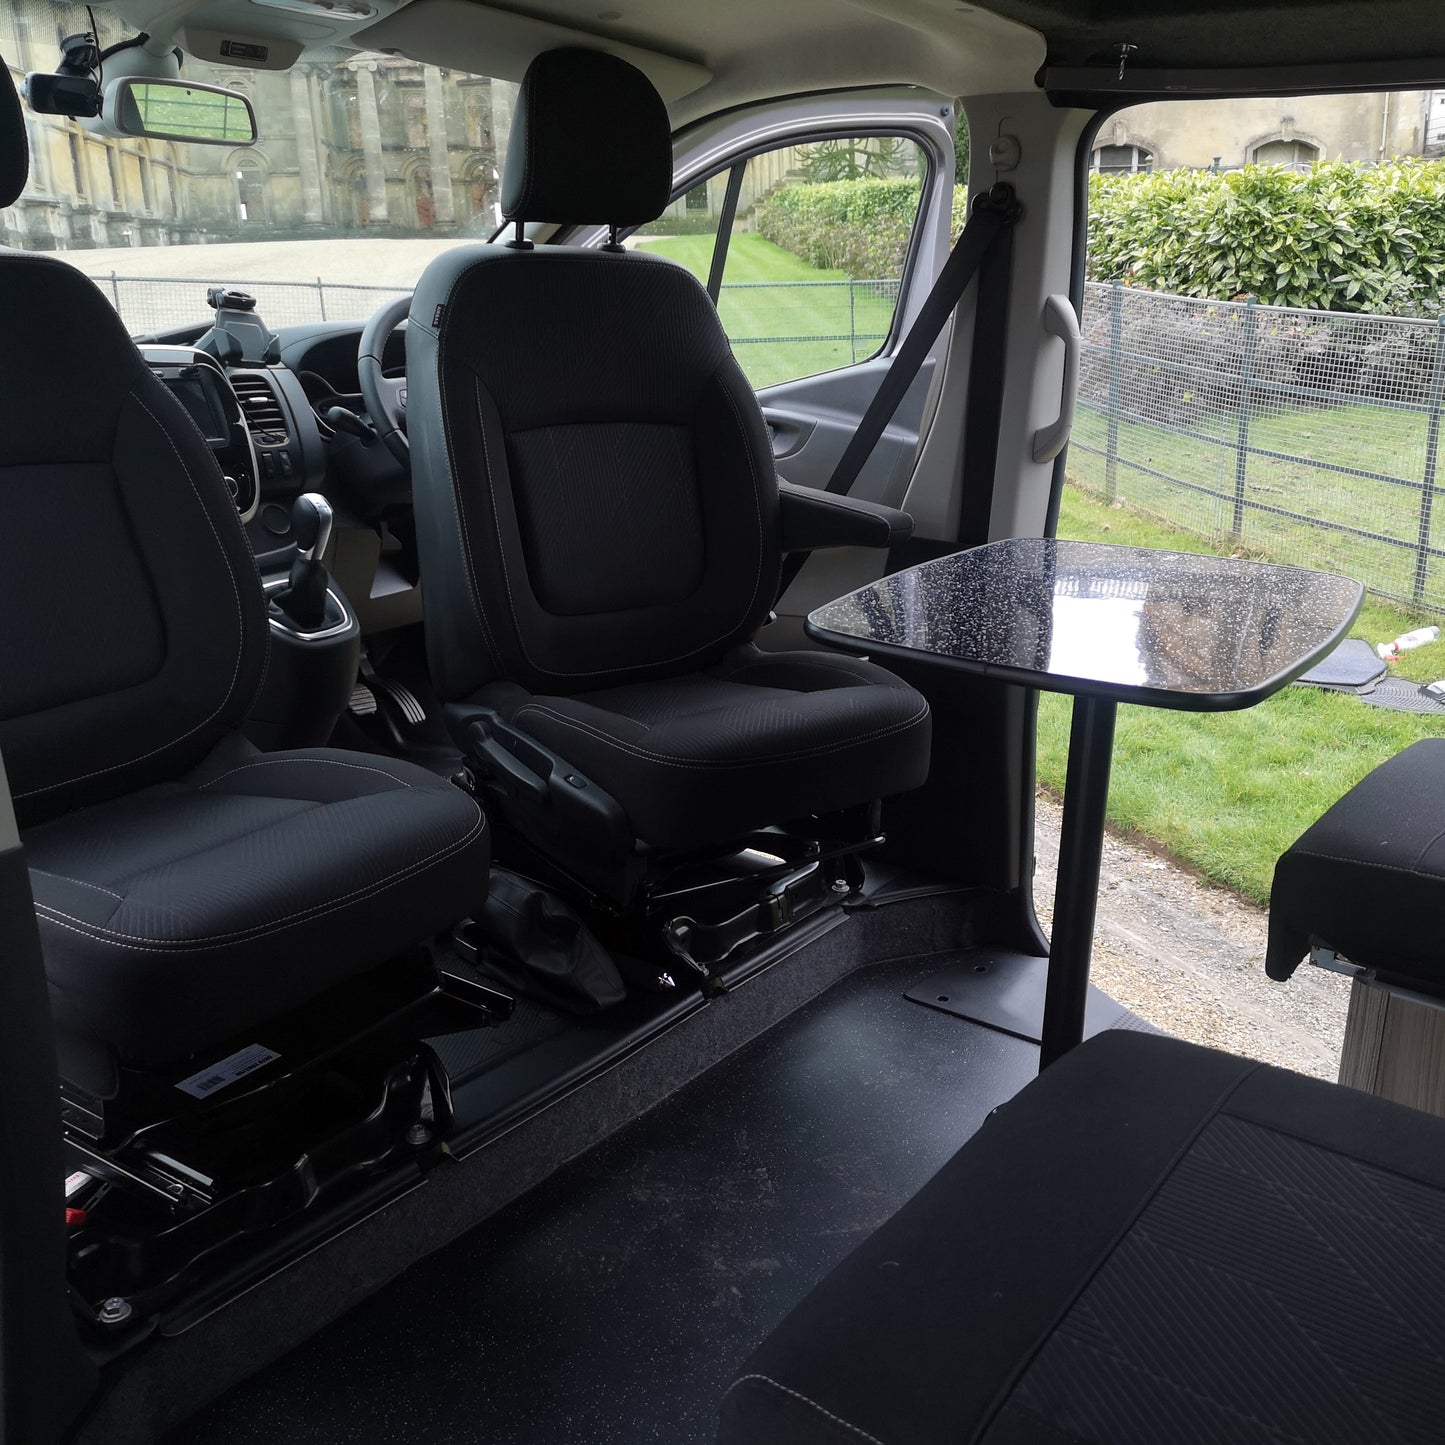 Single bed seat frames two or three traveling seats for Renault Trafic, Nissan NV300, Fiat Talento & Transit Custom - cccampers.myshopify.com